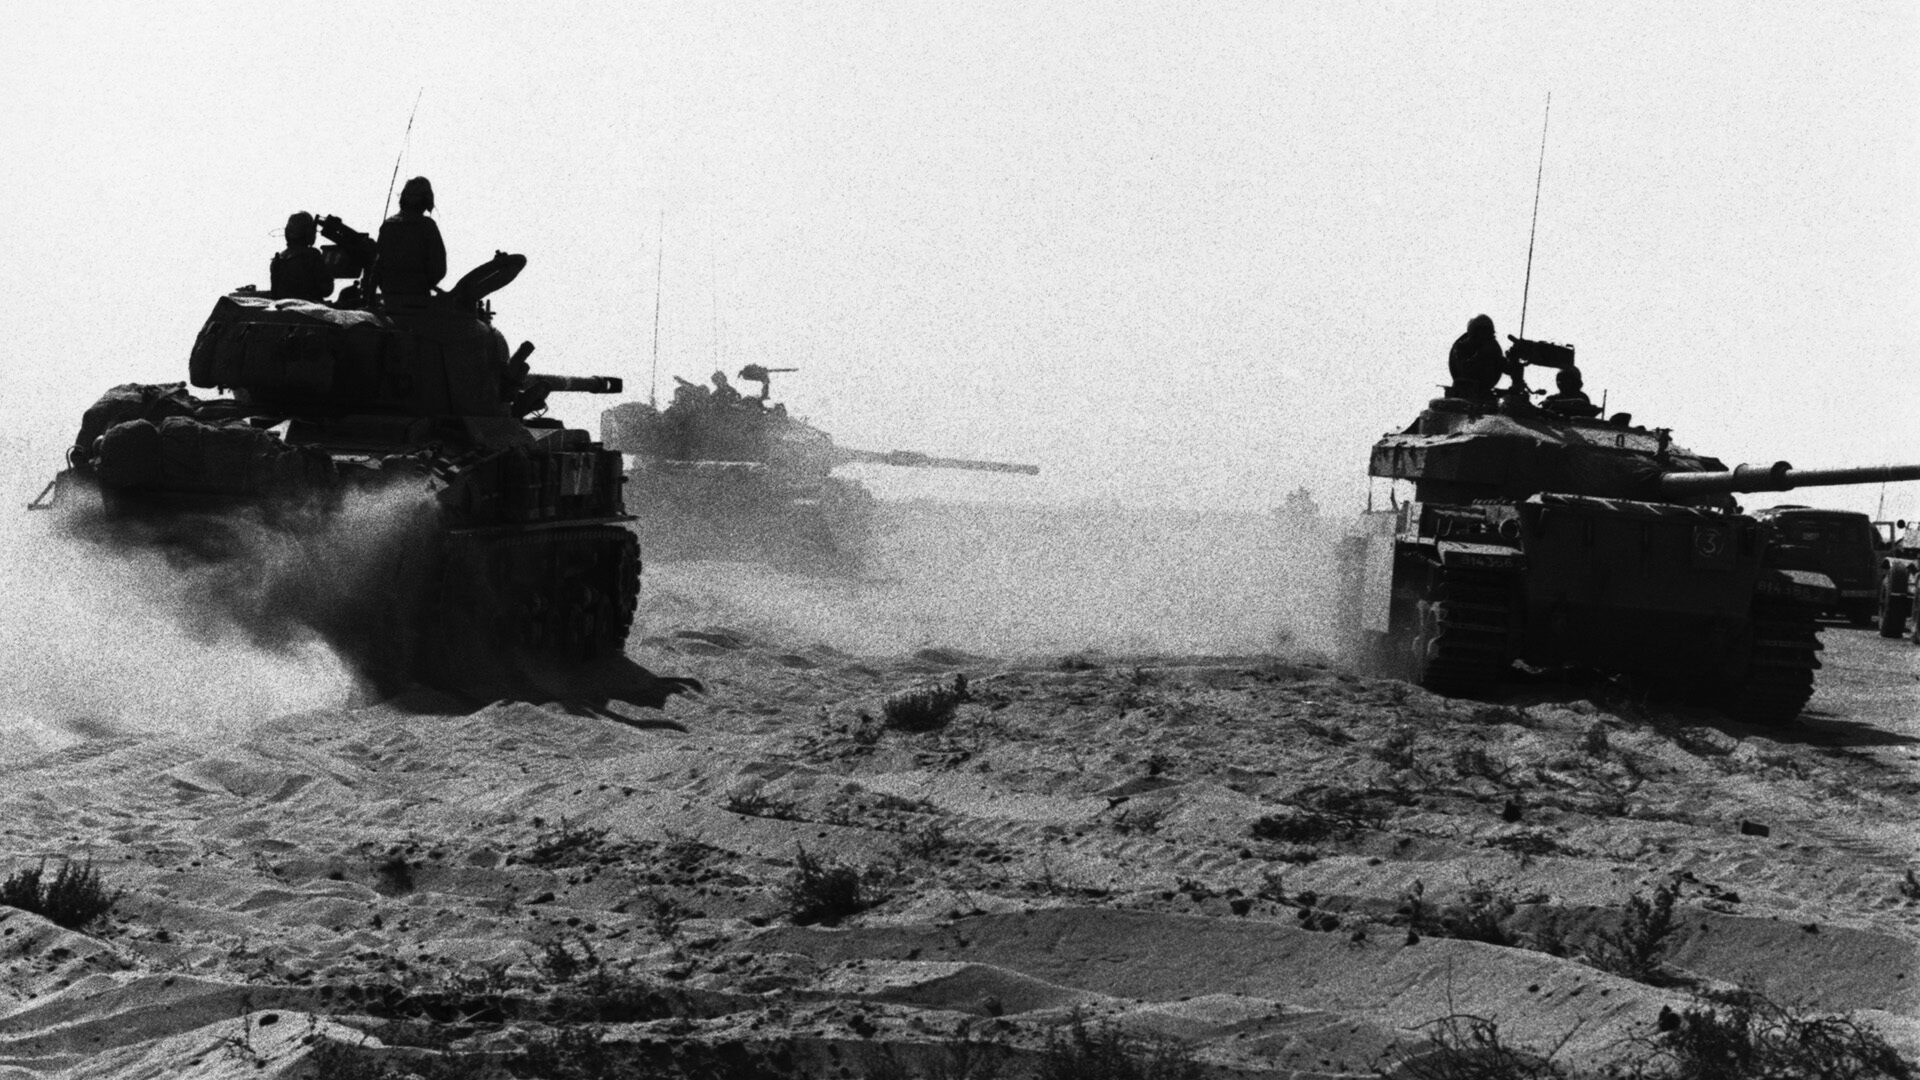 Israeli armor maneuvers in the Sinai Desert. The initial commitment of Israeli reserve units resulted in the loss of 100 tanks but blunted Egyptian efforts to expand the Sinai bridgehead. 